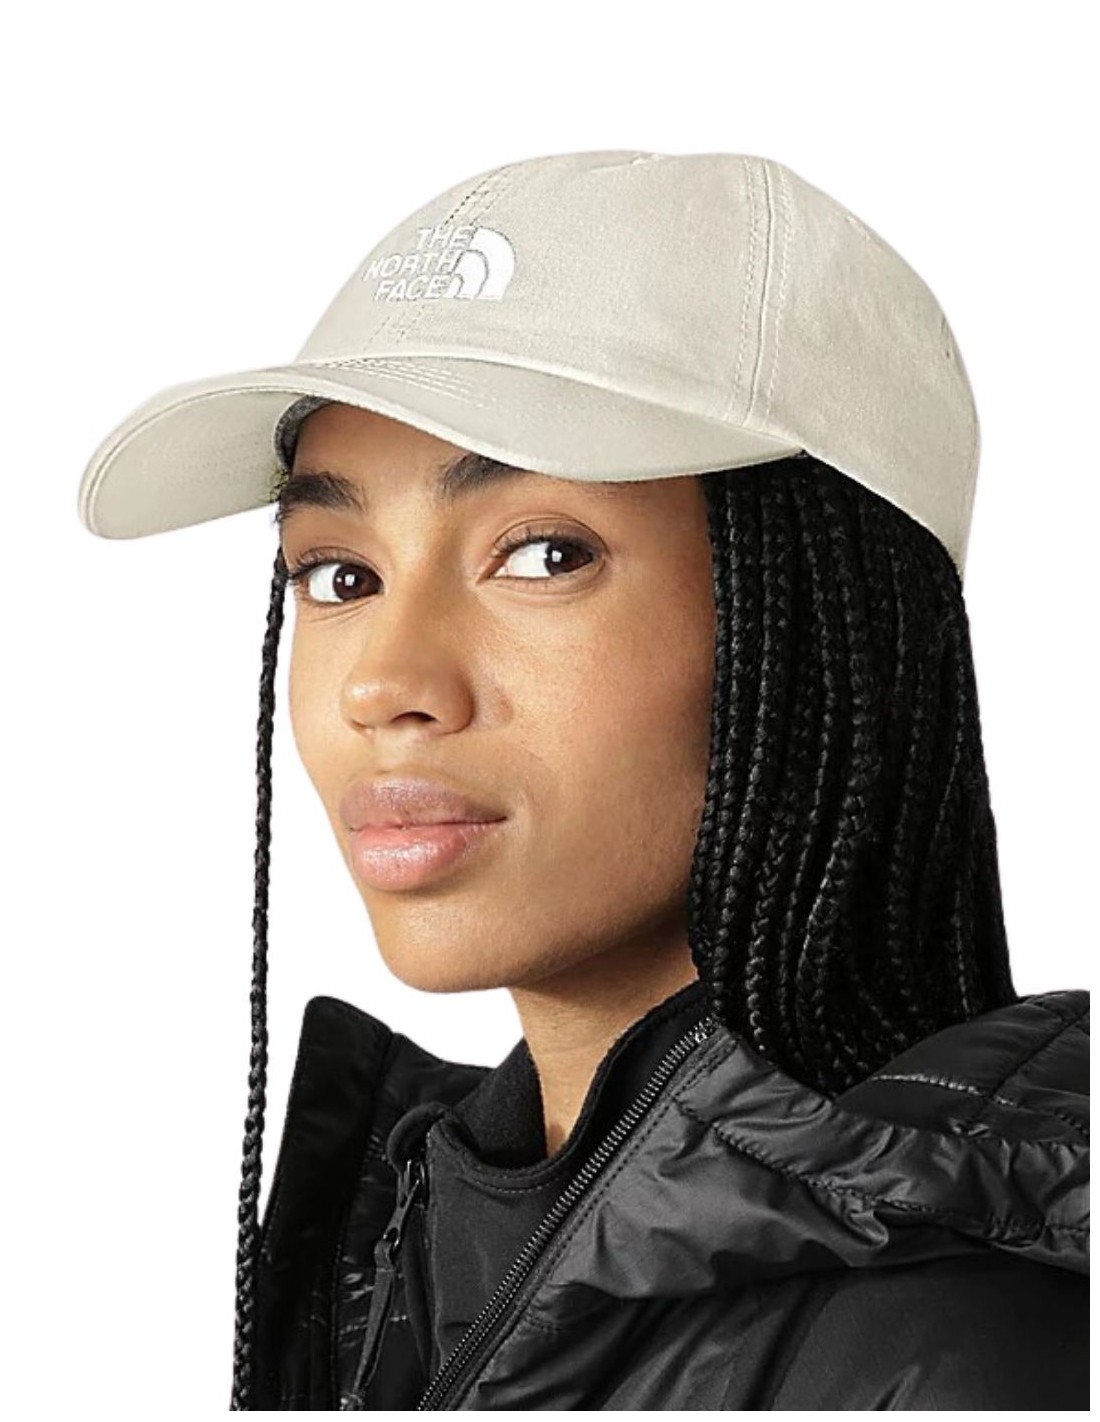 GORRA THE NORTH FACE FORM UNISEX